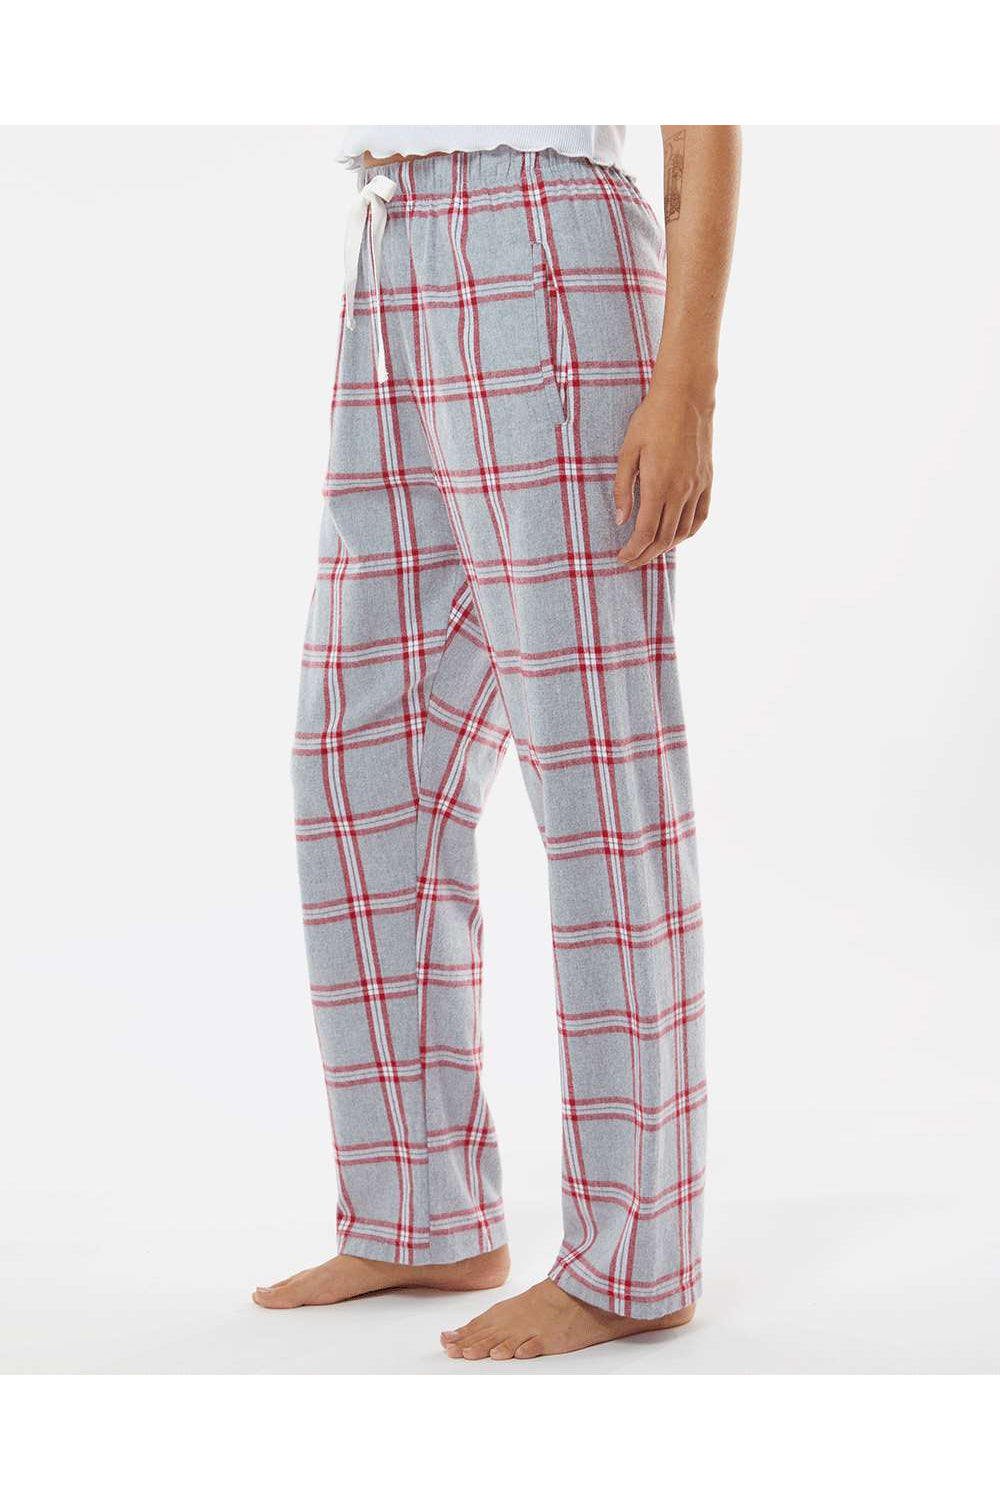 Boxercraft BW6620 Womens Haley Flannel Pants Oxford Red Tomboy Plaid Model Side